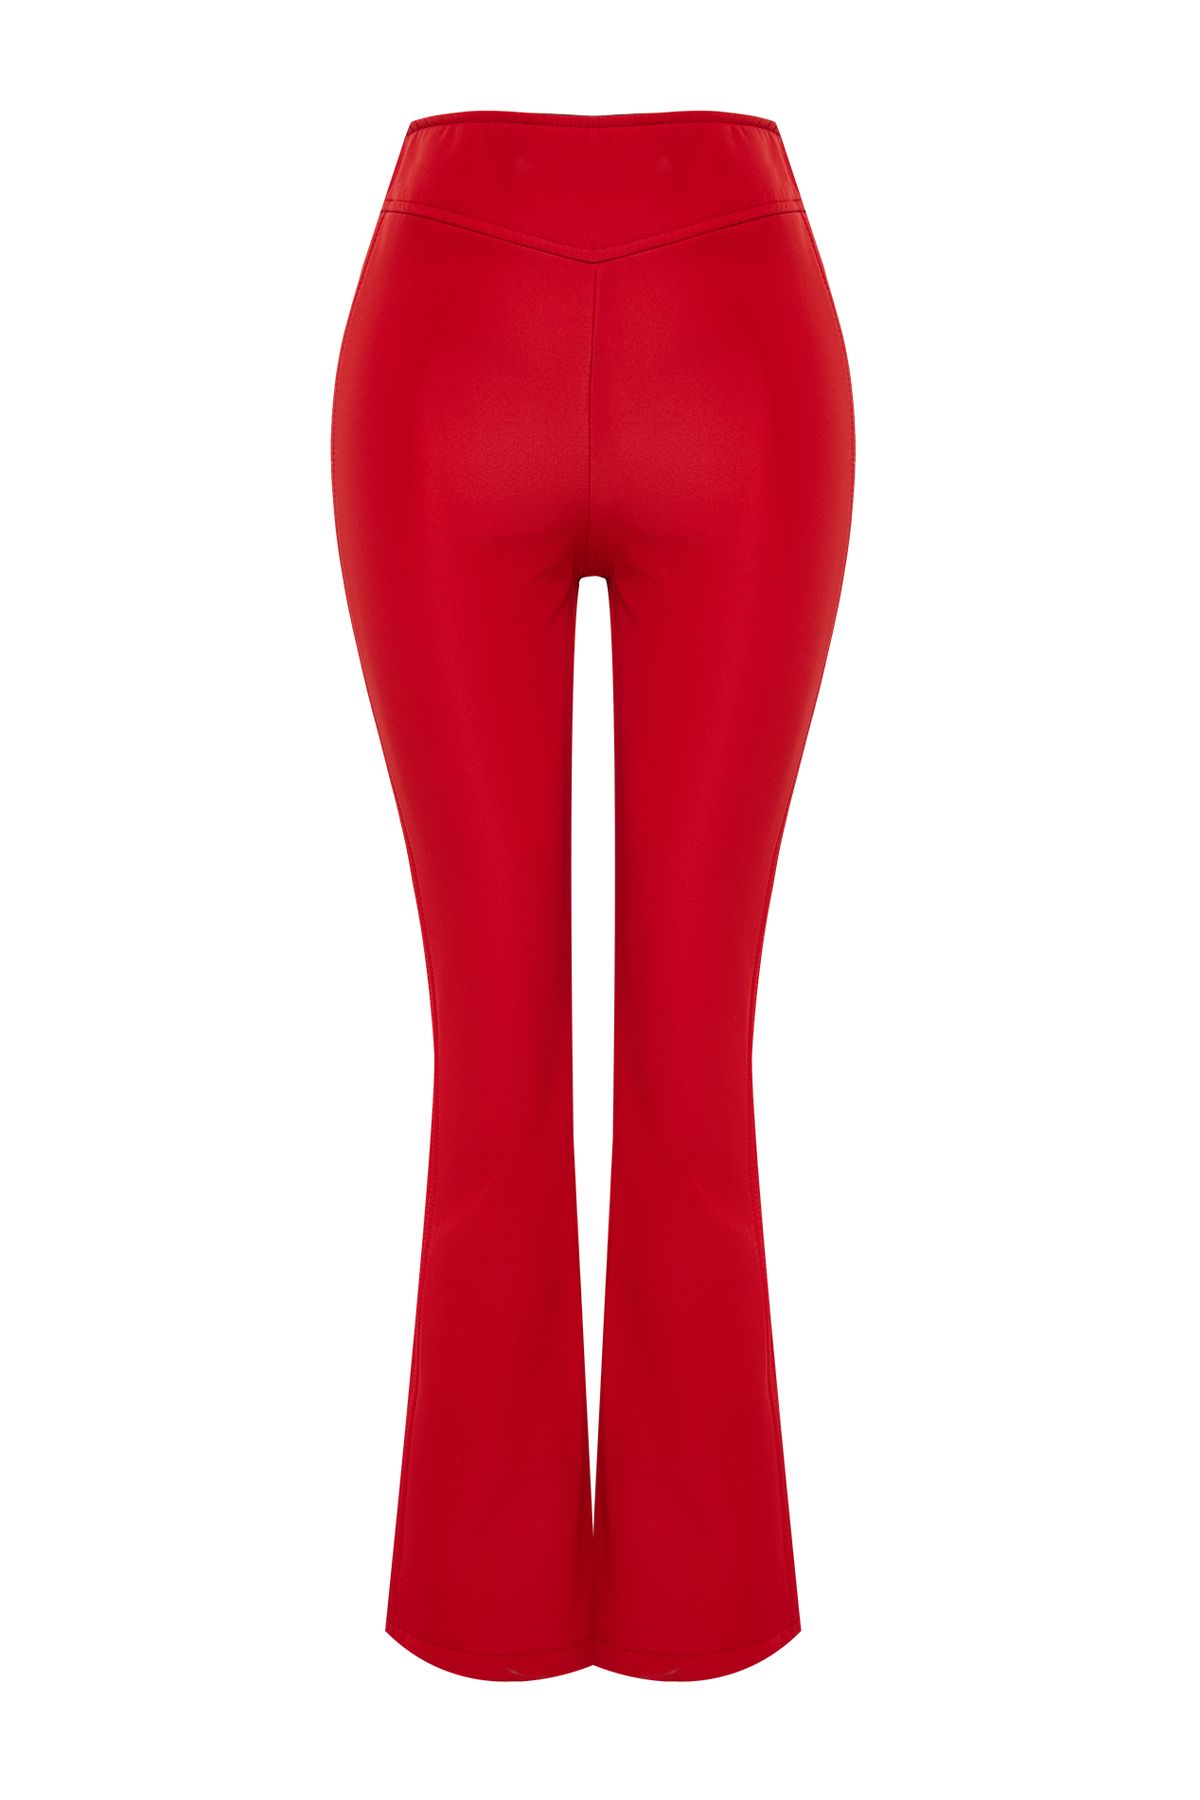 COSTUME RENTAL - X331 Shiny Red disco Pants med – WPC Retail Group Ltd.